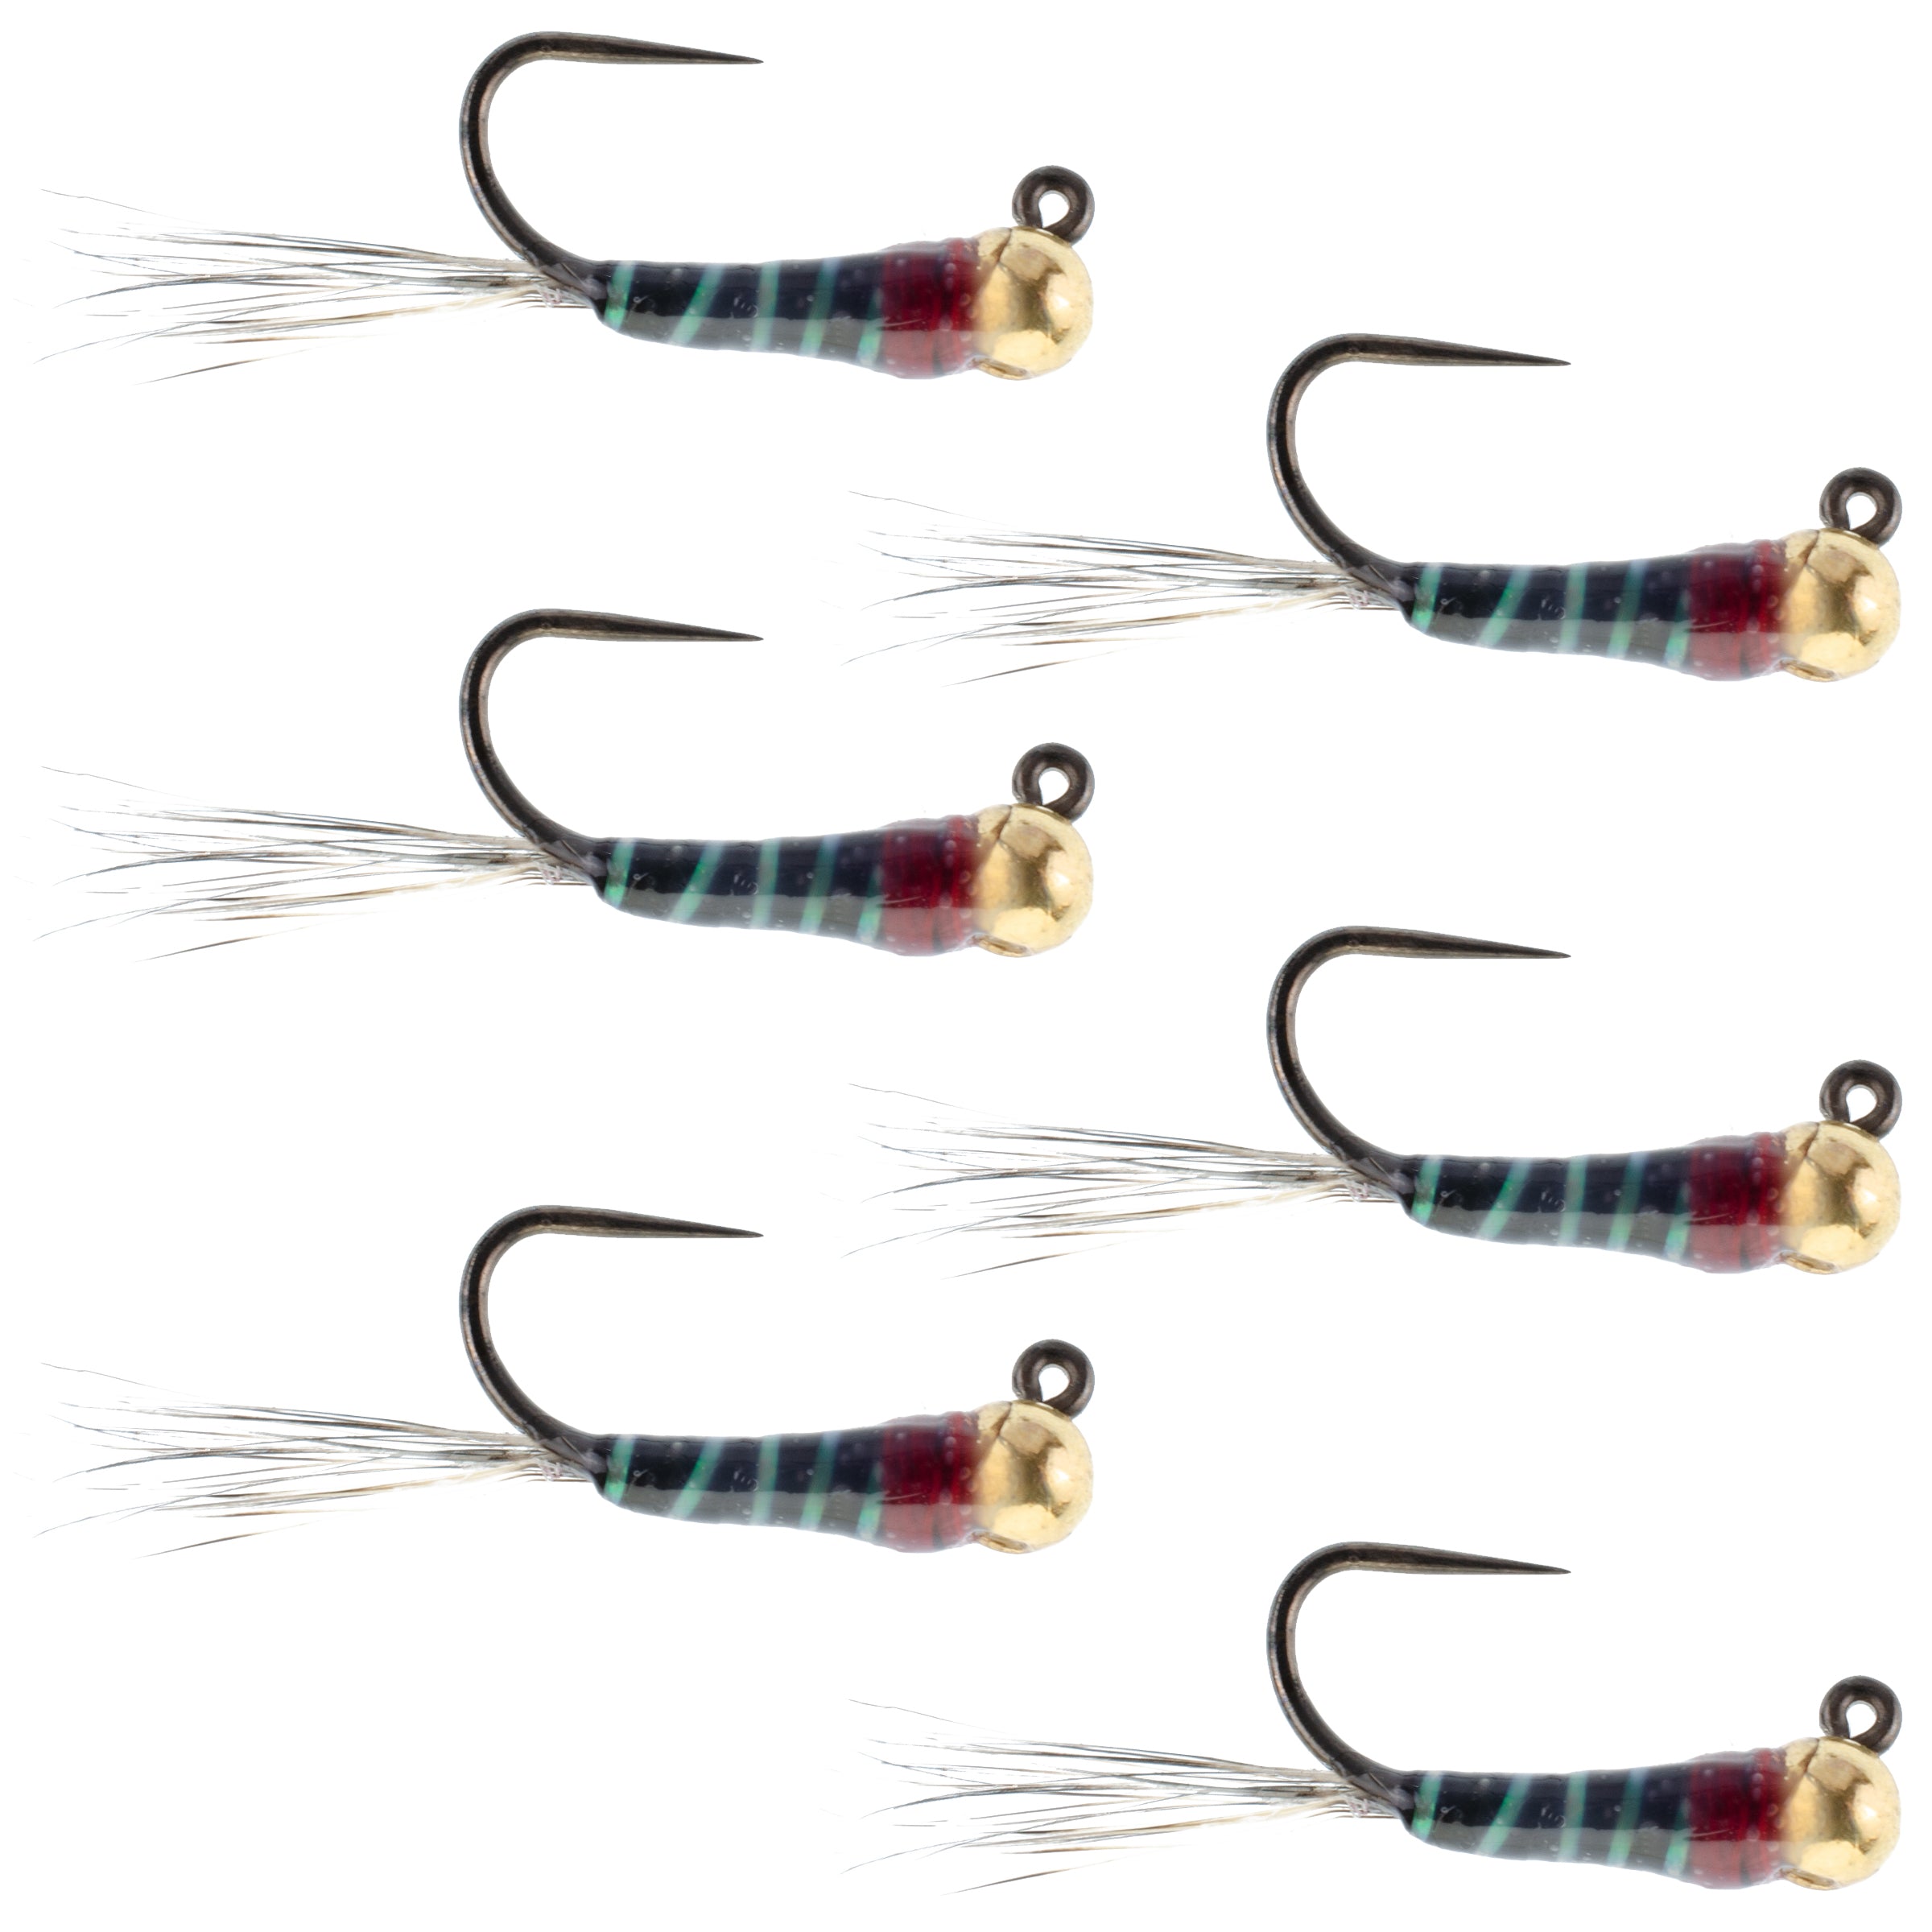 6 Eggstasy Egg Jig Trout and Steelhead Egg Fly Patterns. Winter Fly Fishing  Flies. Euro Nymph Egg. Tungsten Barbless Jig. 